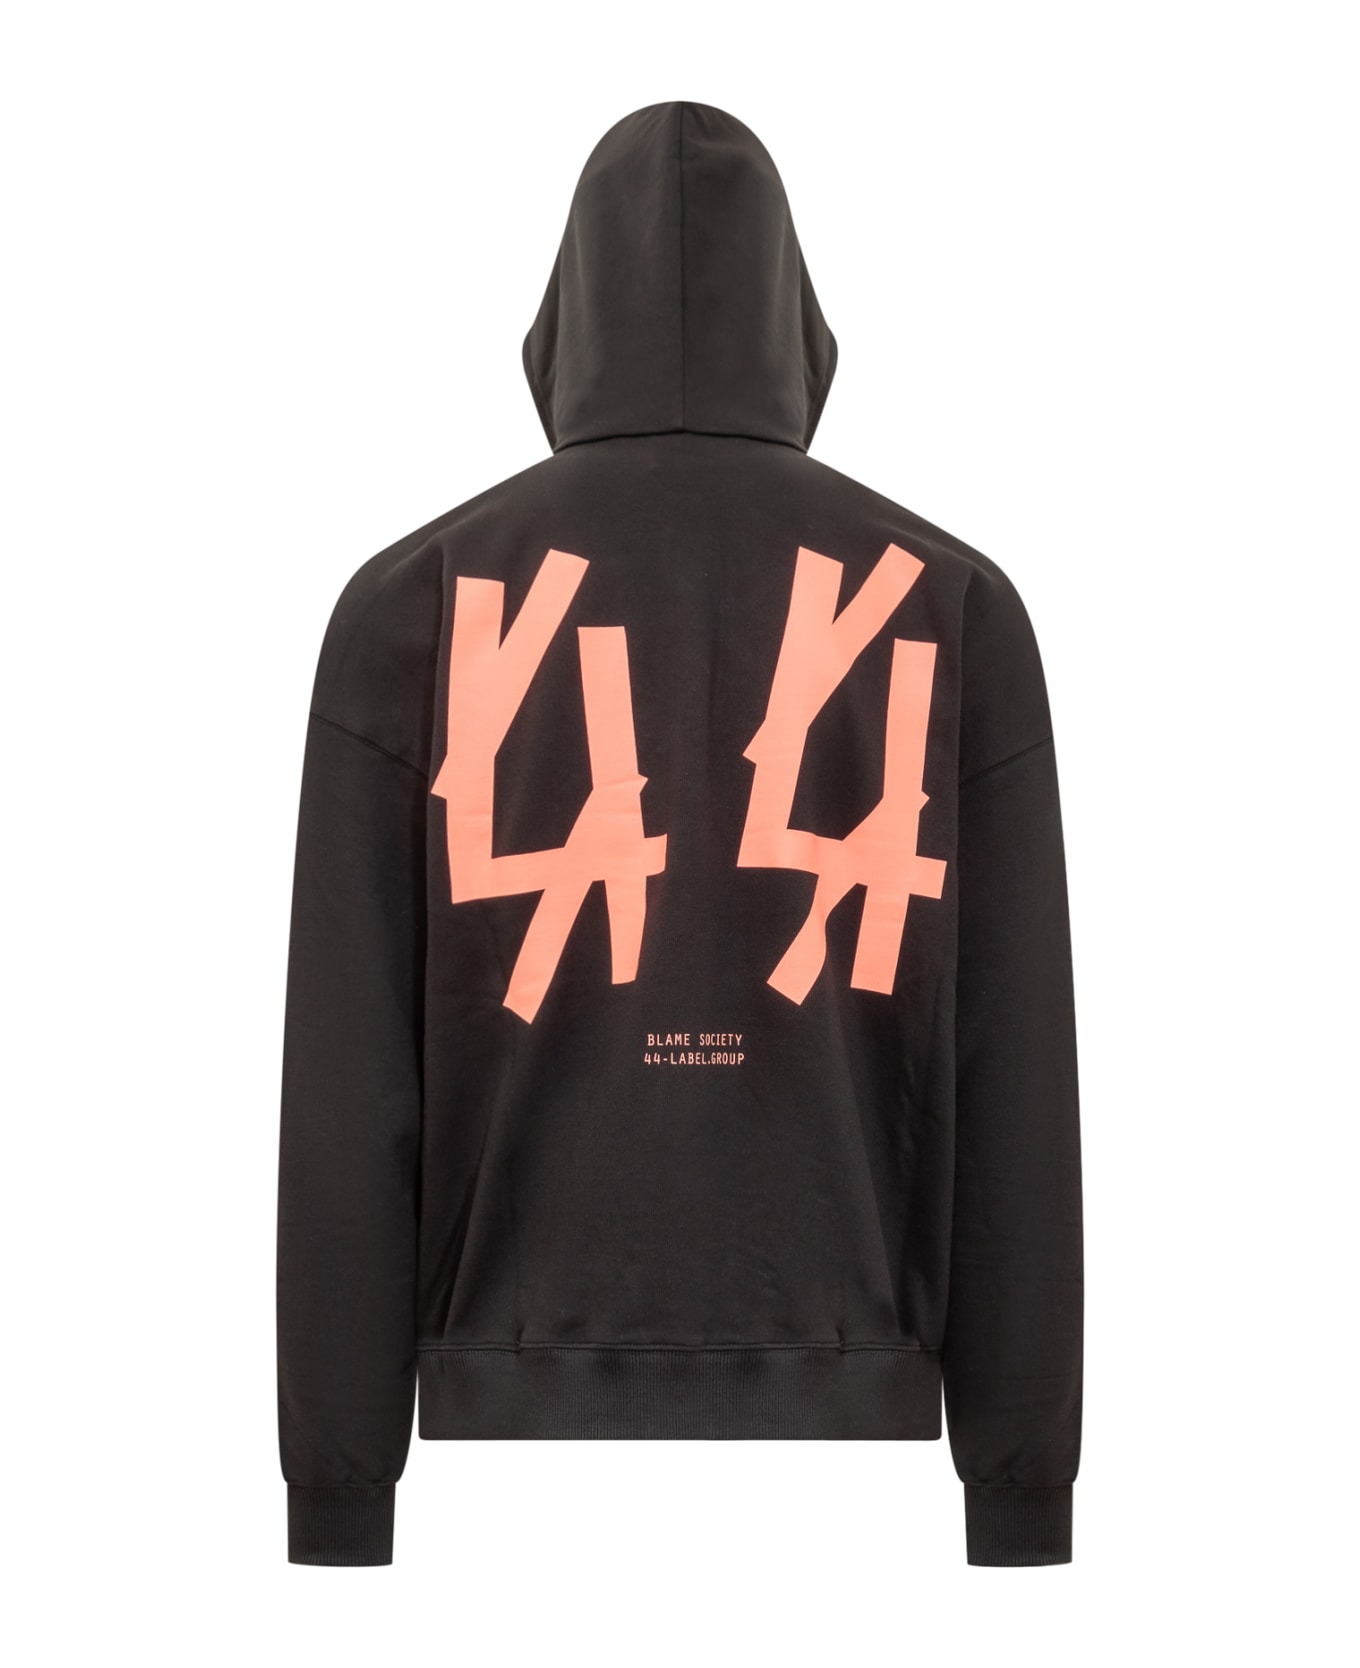 44 Label Group Hoodie With Logo - BLACK